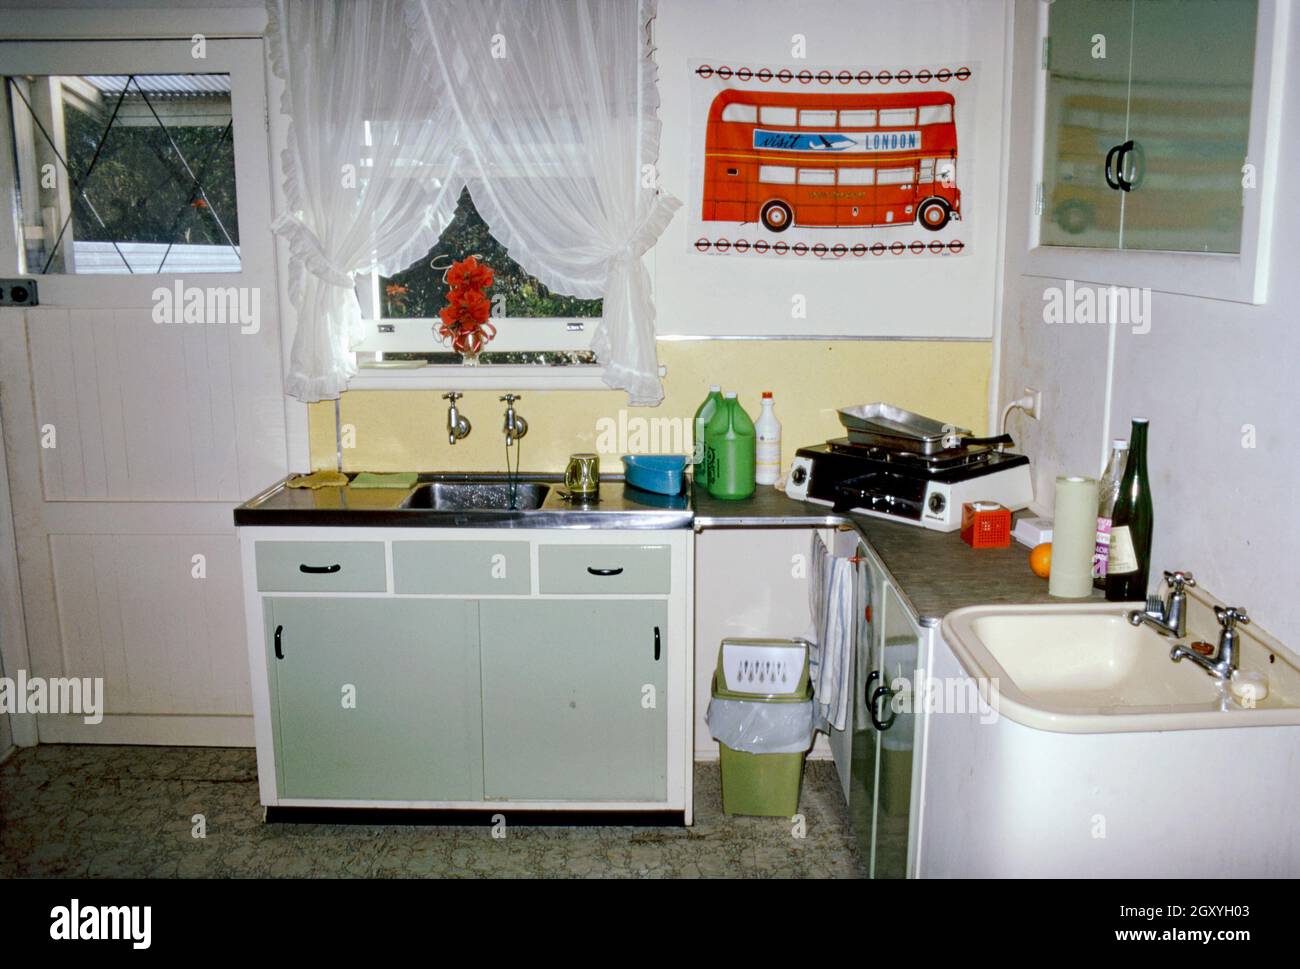 A very basic kitchen in an appartment or flat in a suburb of Sydney, NSW, Australia in 1973. Interestingly although it is poorly equiped (with only a small plug-in, worktop hob and grill) it contains two sinks! For decoration there is a tea-towel of a London bus pinned to the wall This image is from an old amateur Kodak colour transparency – a vintage 1970s photograph. Stock Photo